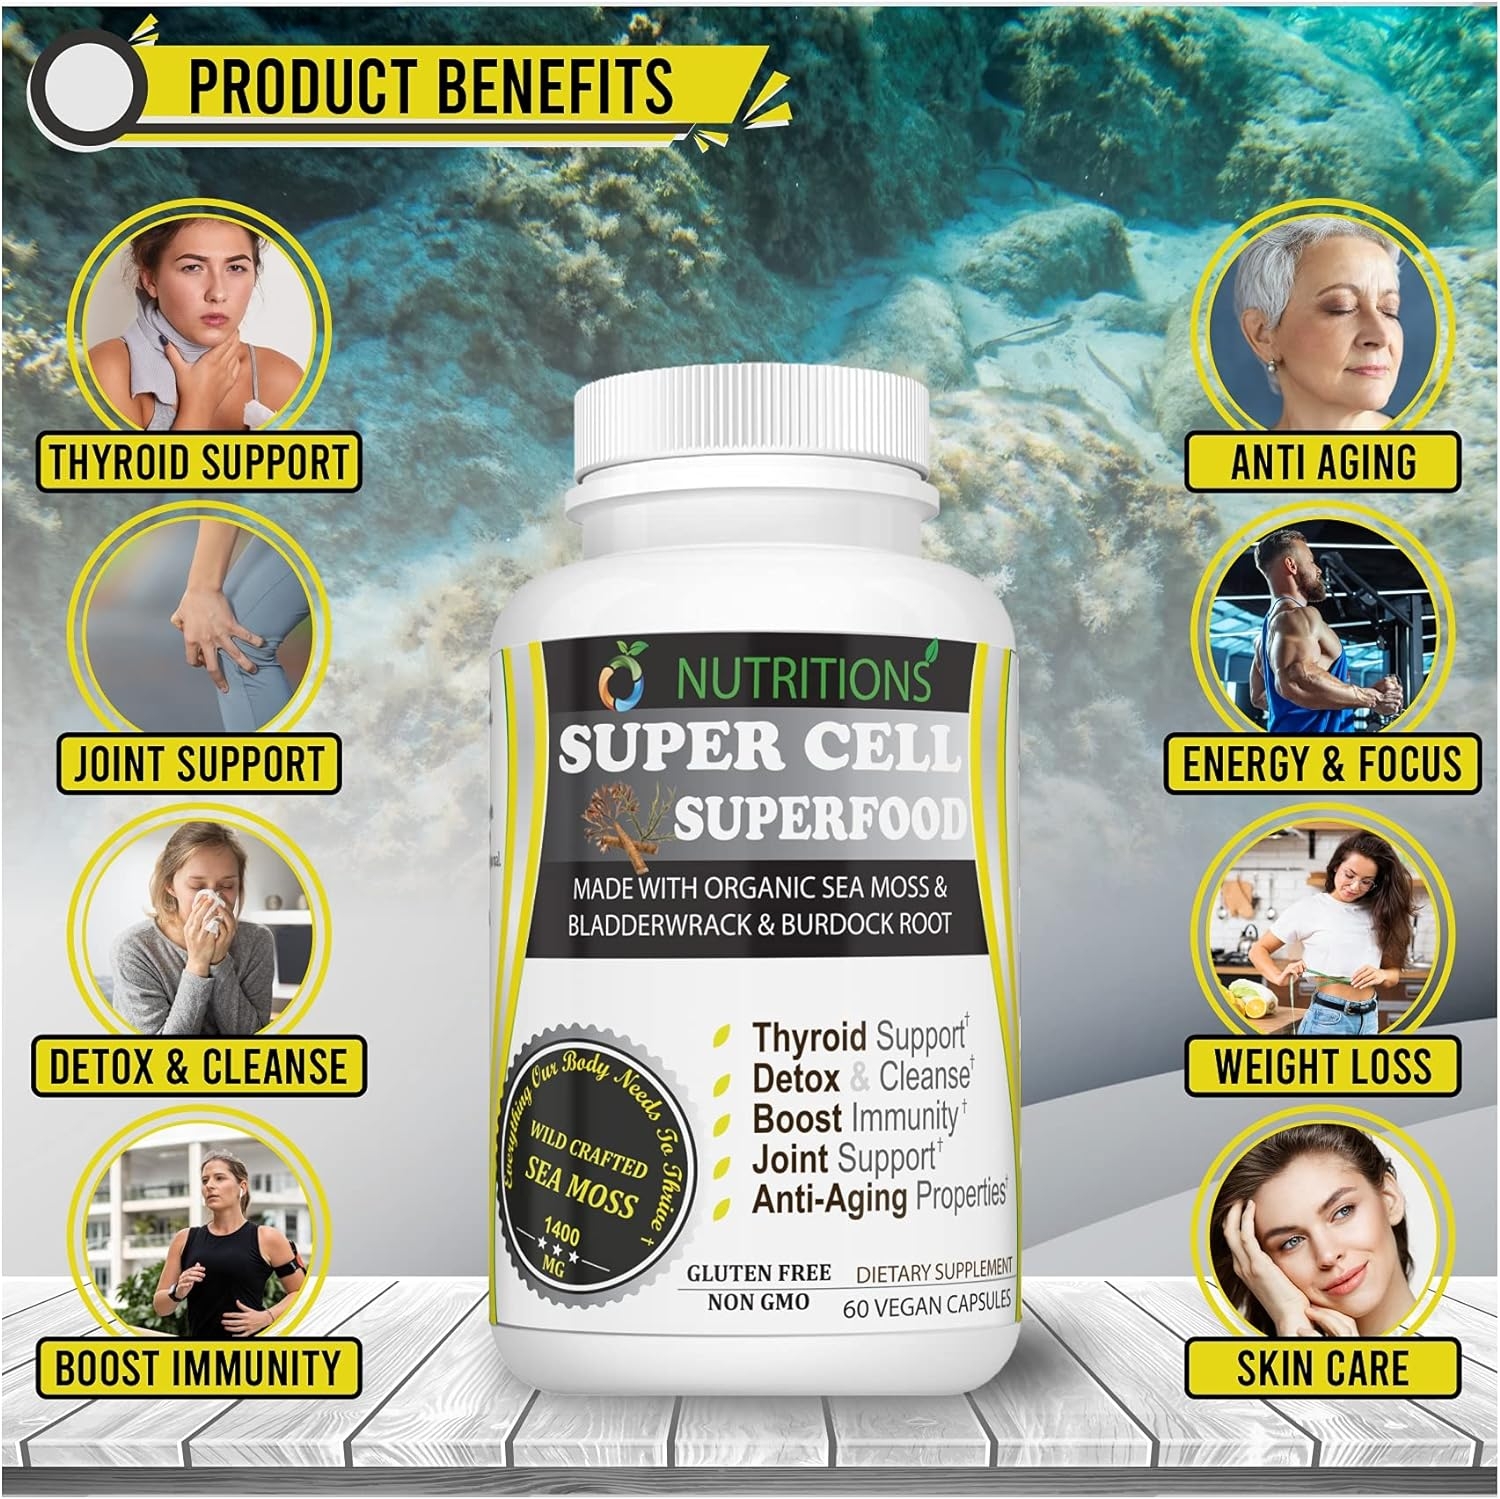 O Nutritions Certified Organic Sea Moss, Super Cell Superfood Made with Organic Irish Sea Moss, Bladderwrack and Burdock Root, Wildcrafted Sea Moss Capsules, Vegan Seamoss Pill (Super Cell Superfood)